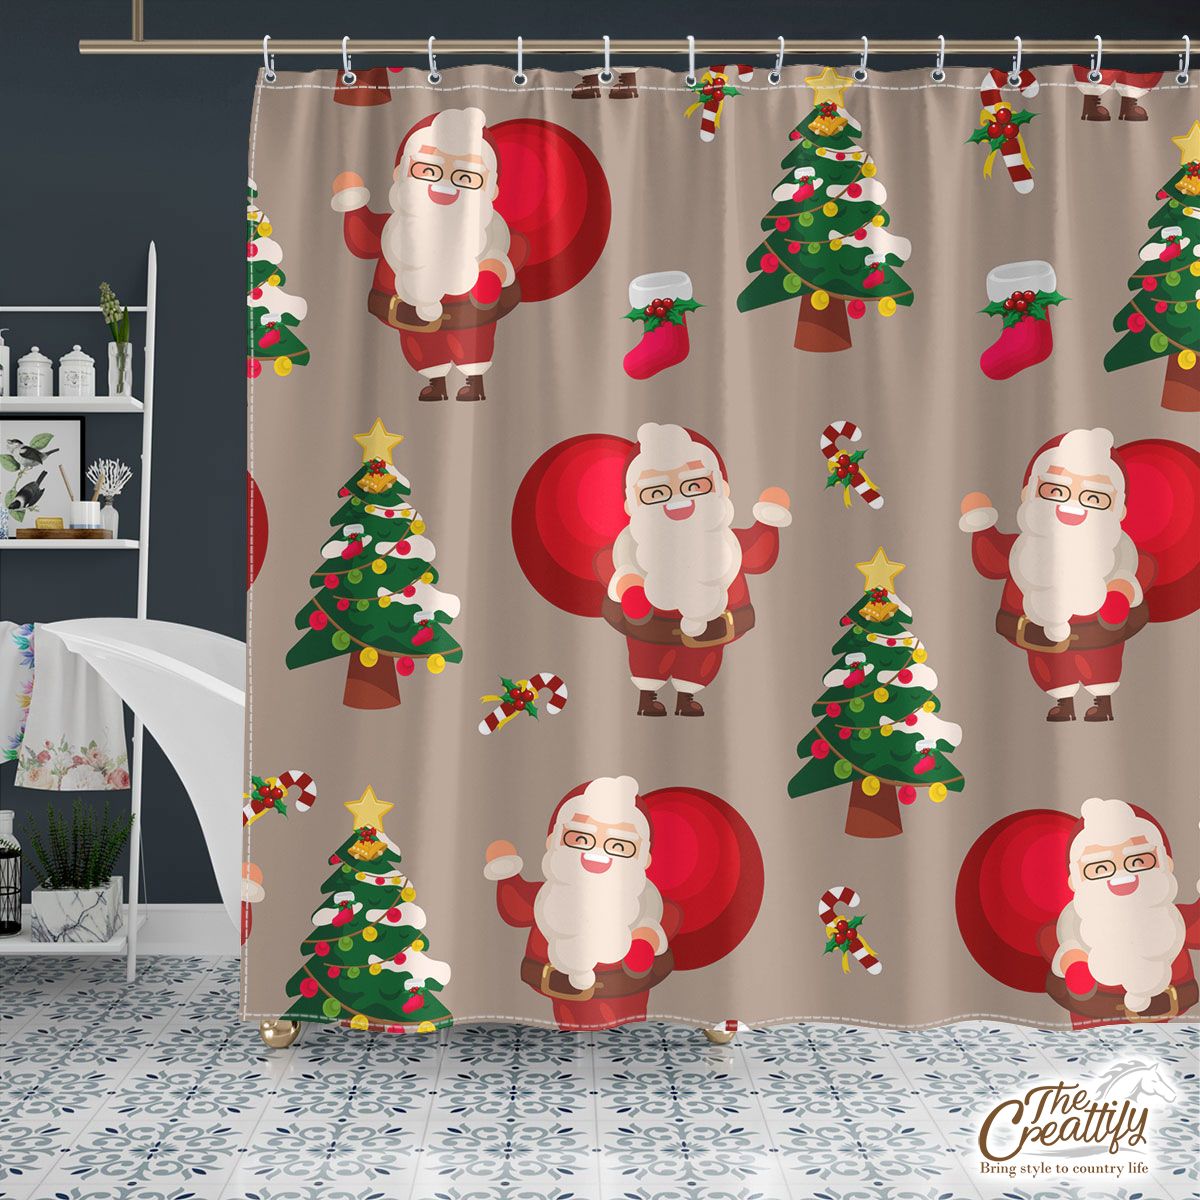 Santa Clause, Chritmas Tree, Candy Cane On Brown Background Shower Curtain